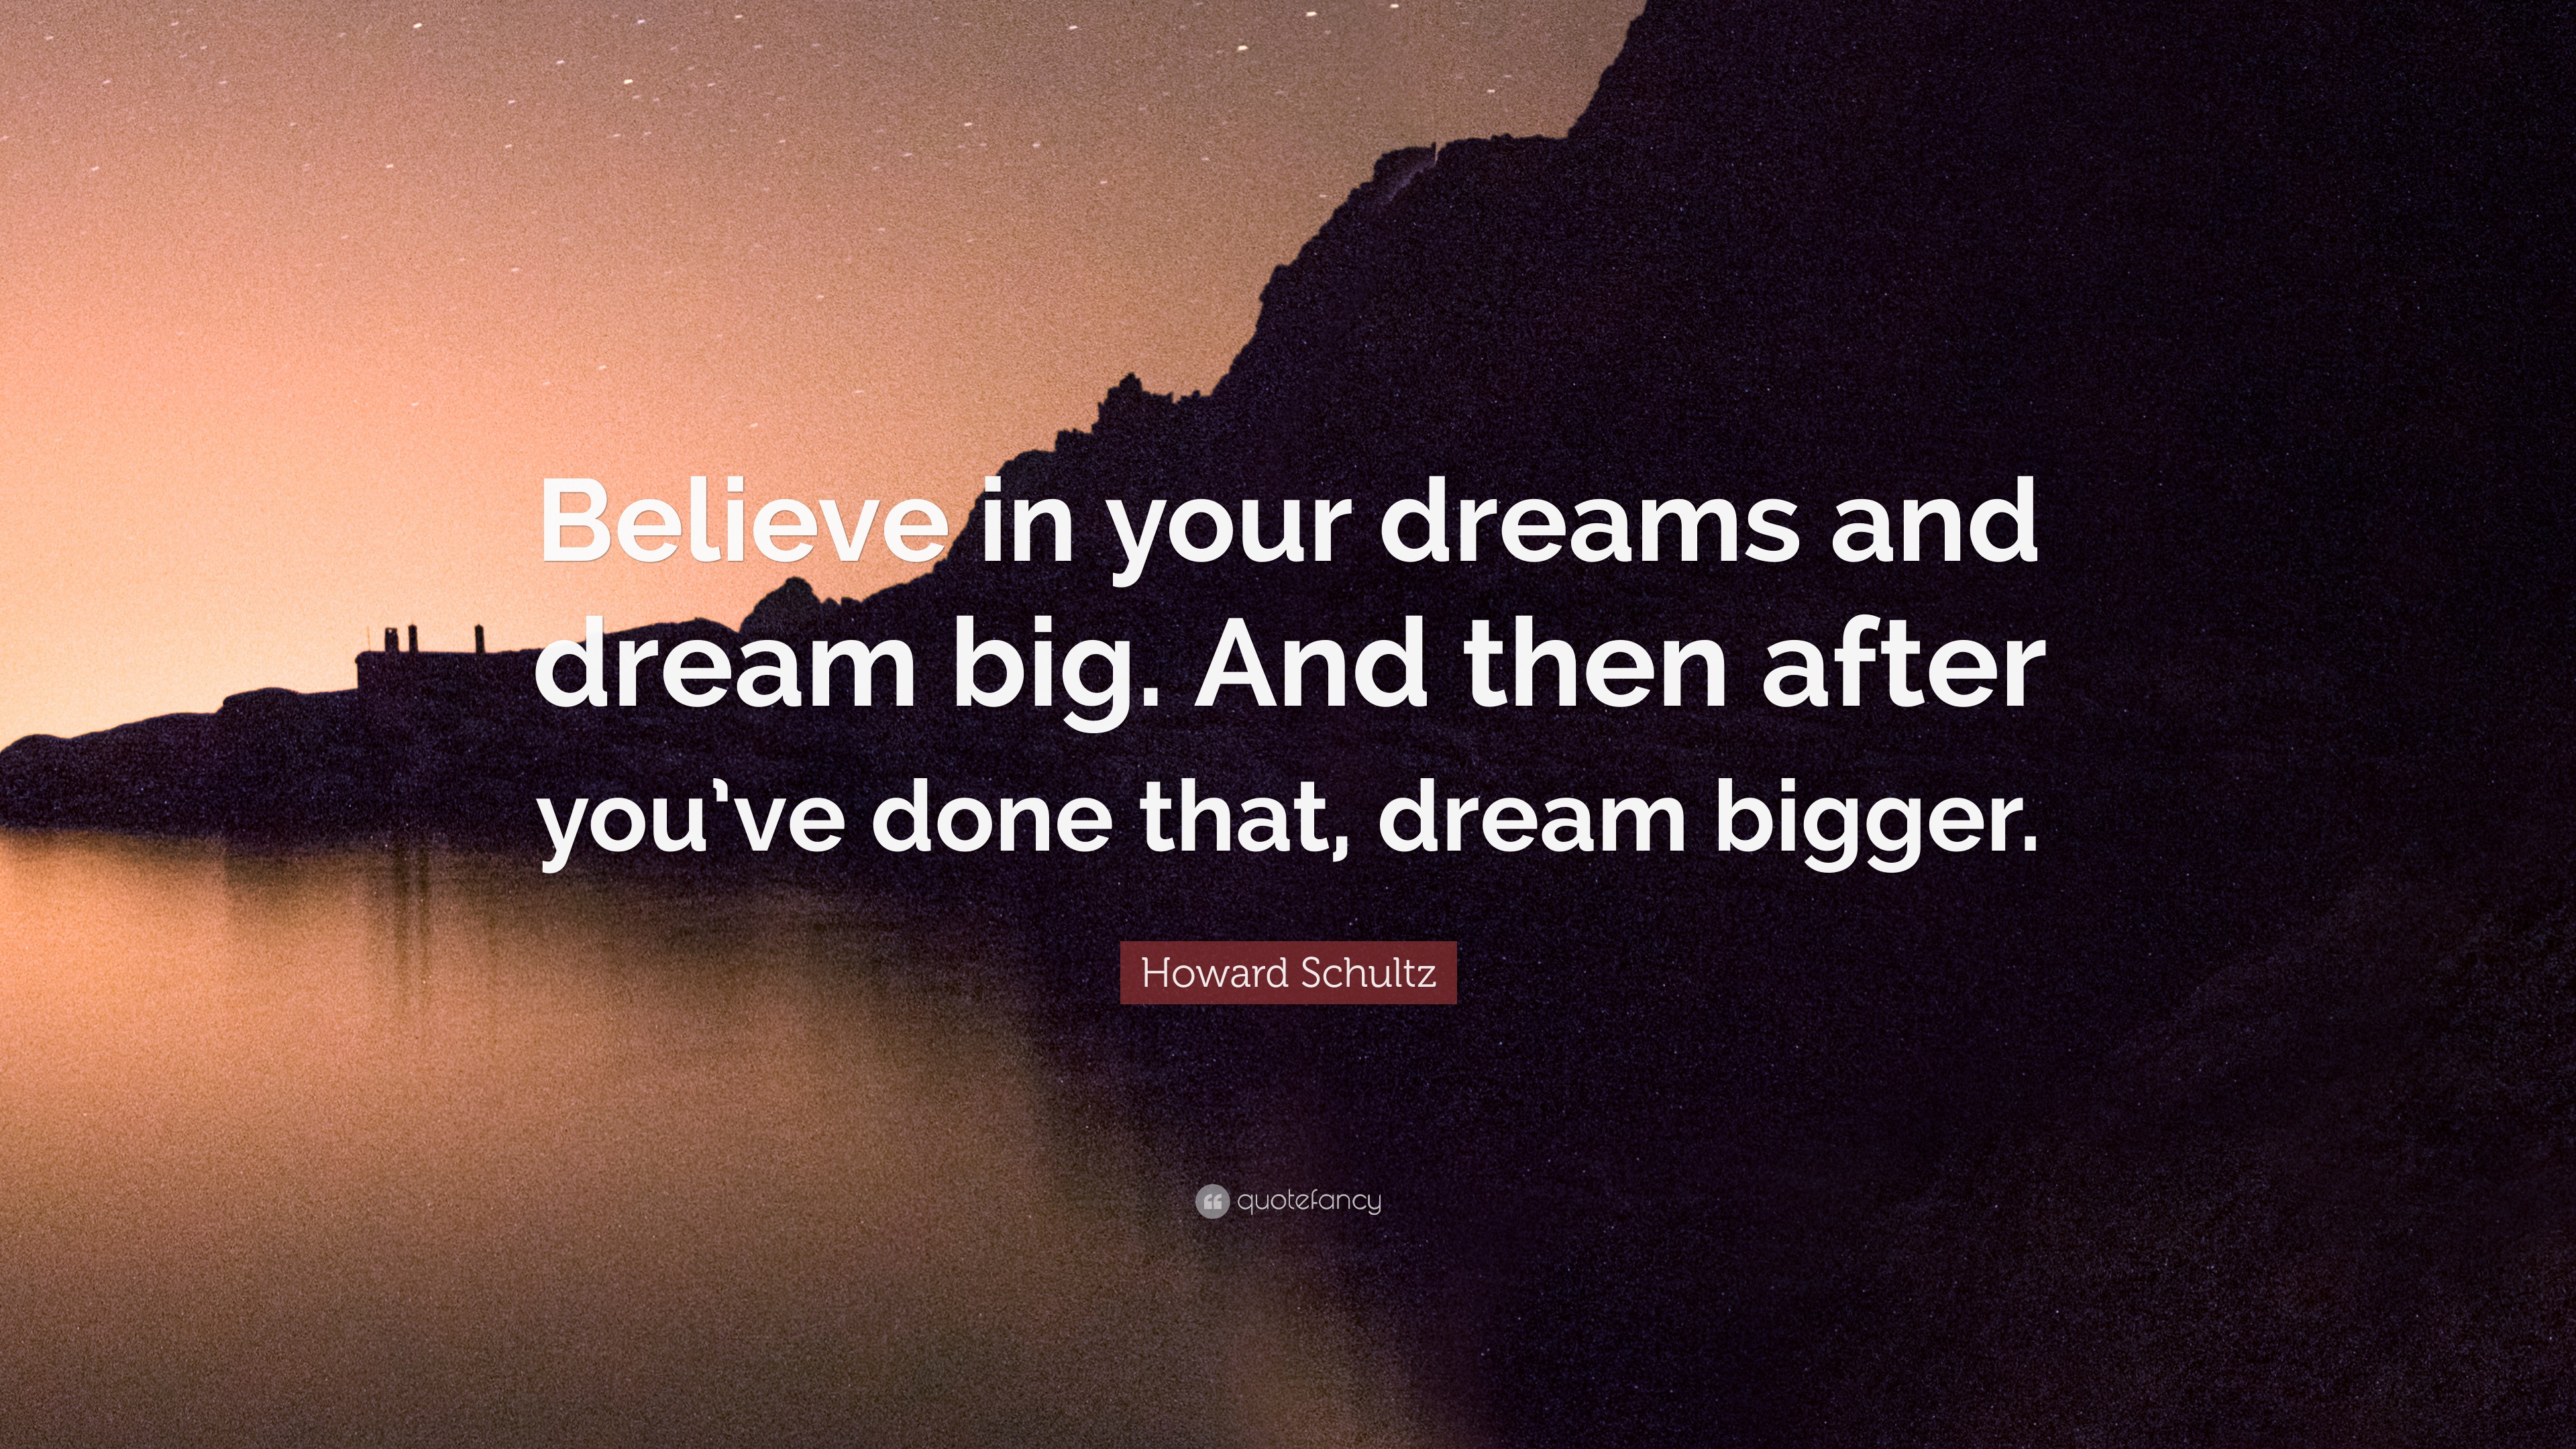 Howard Schultz Quote Believe in your dreams and dream 